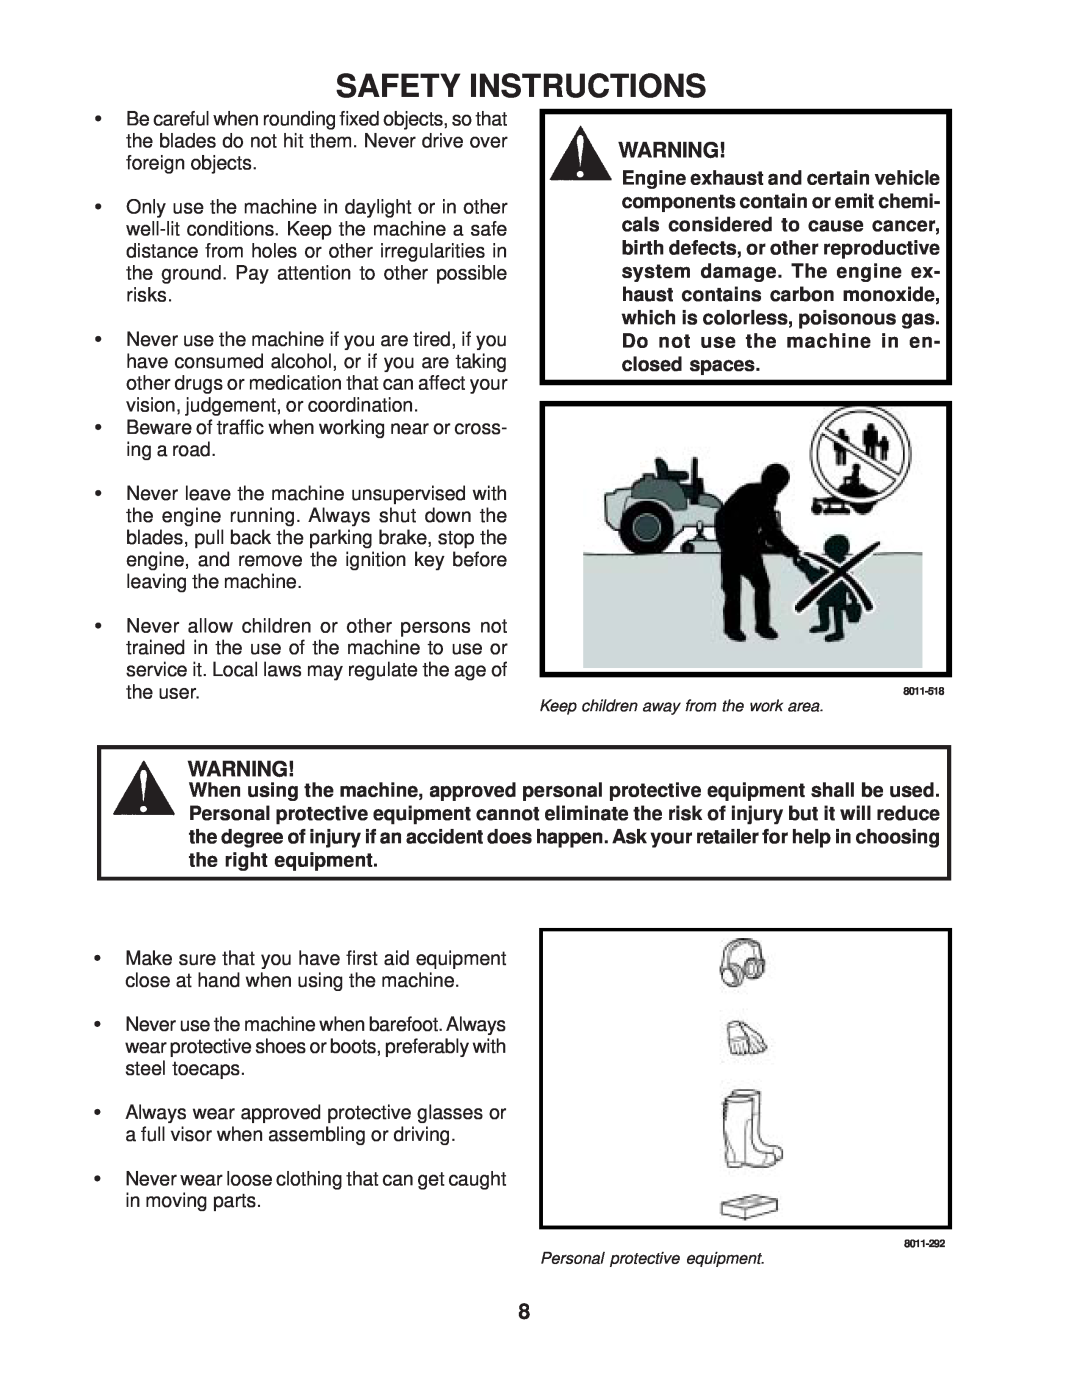 Husqvarna 968999224 / ZTH6127KOB Safety Instructions, Keep children away from the work area, Personal protective equipment 